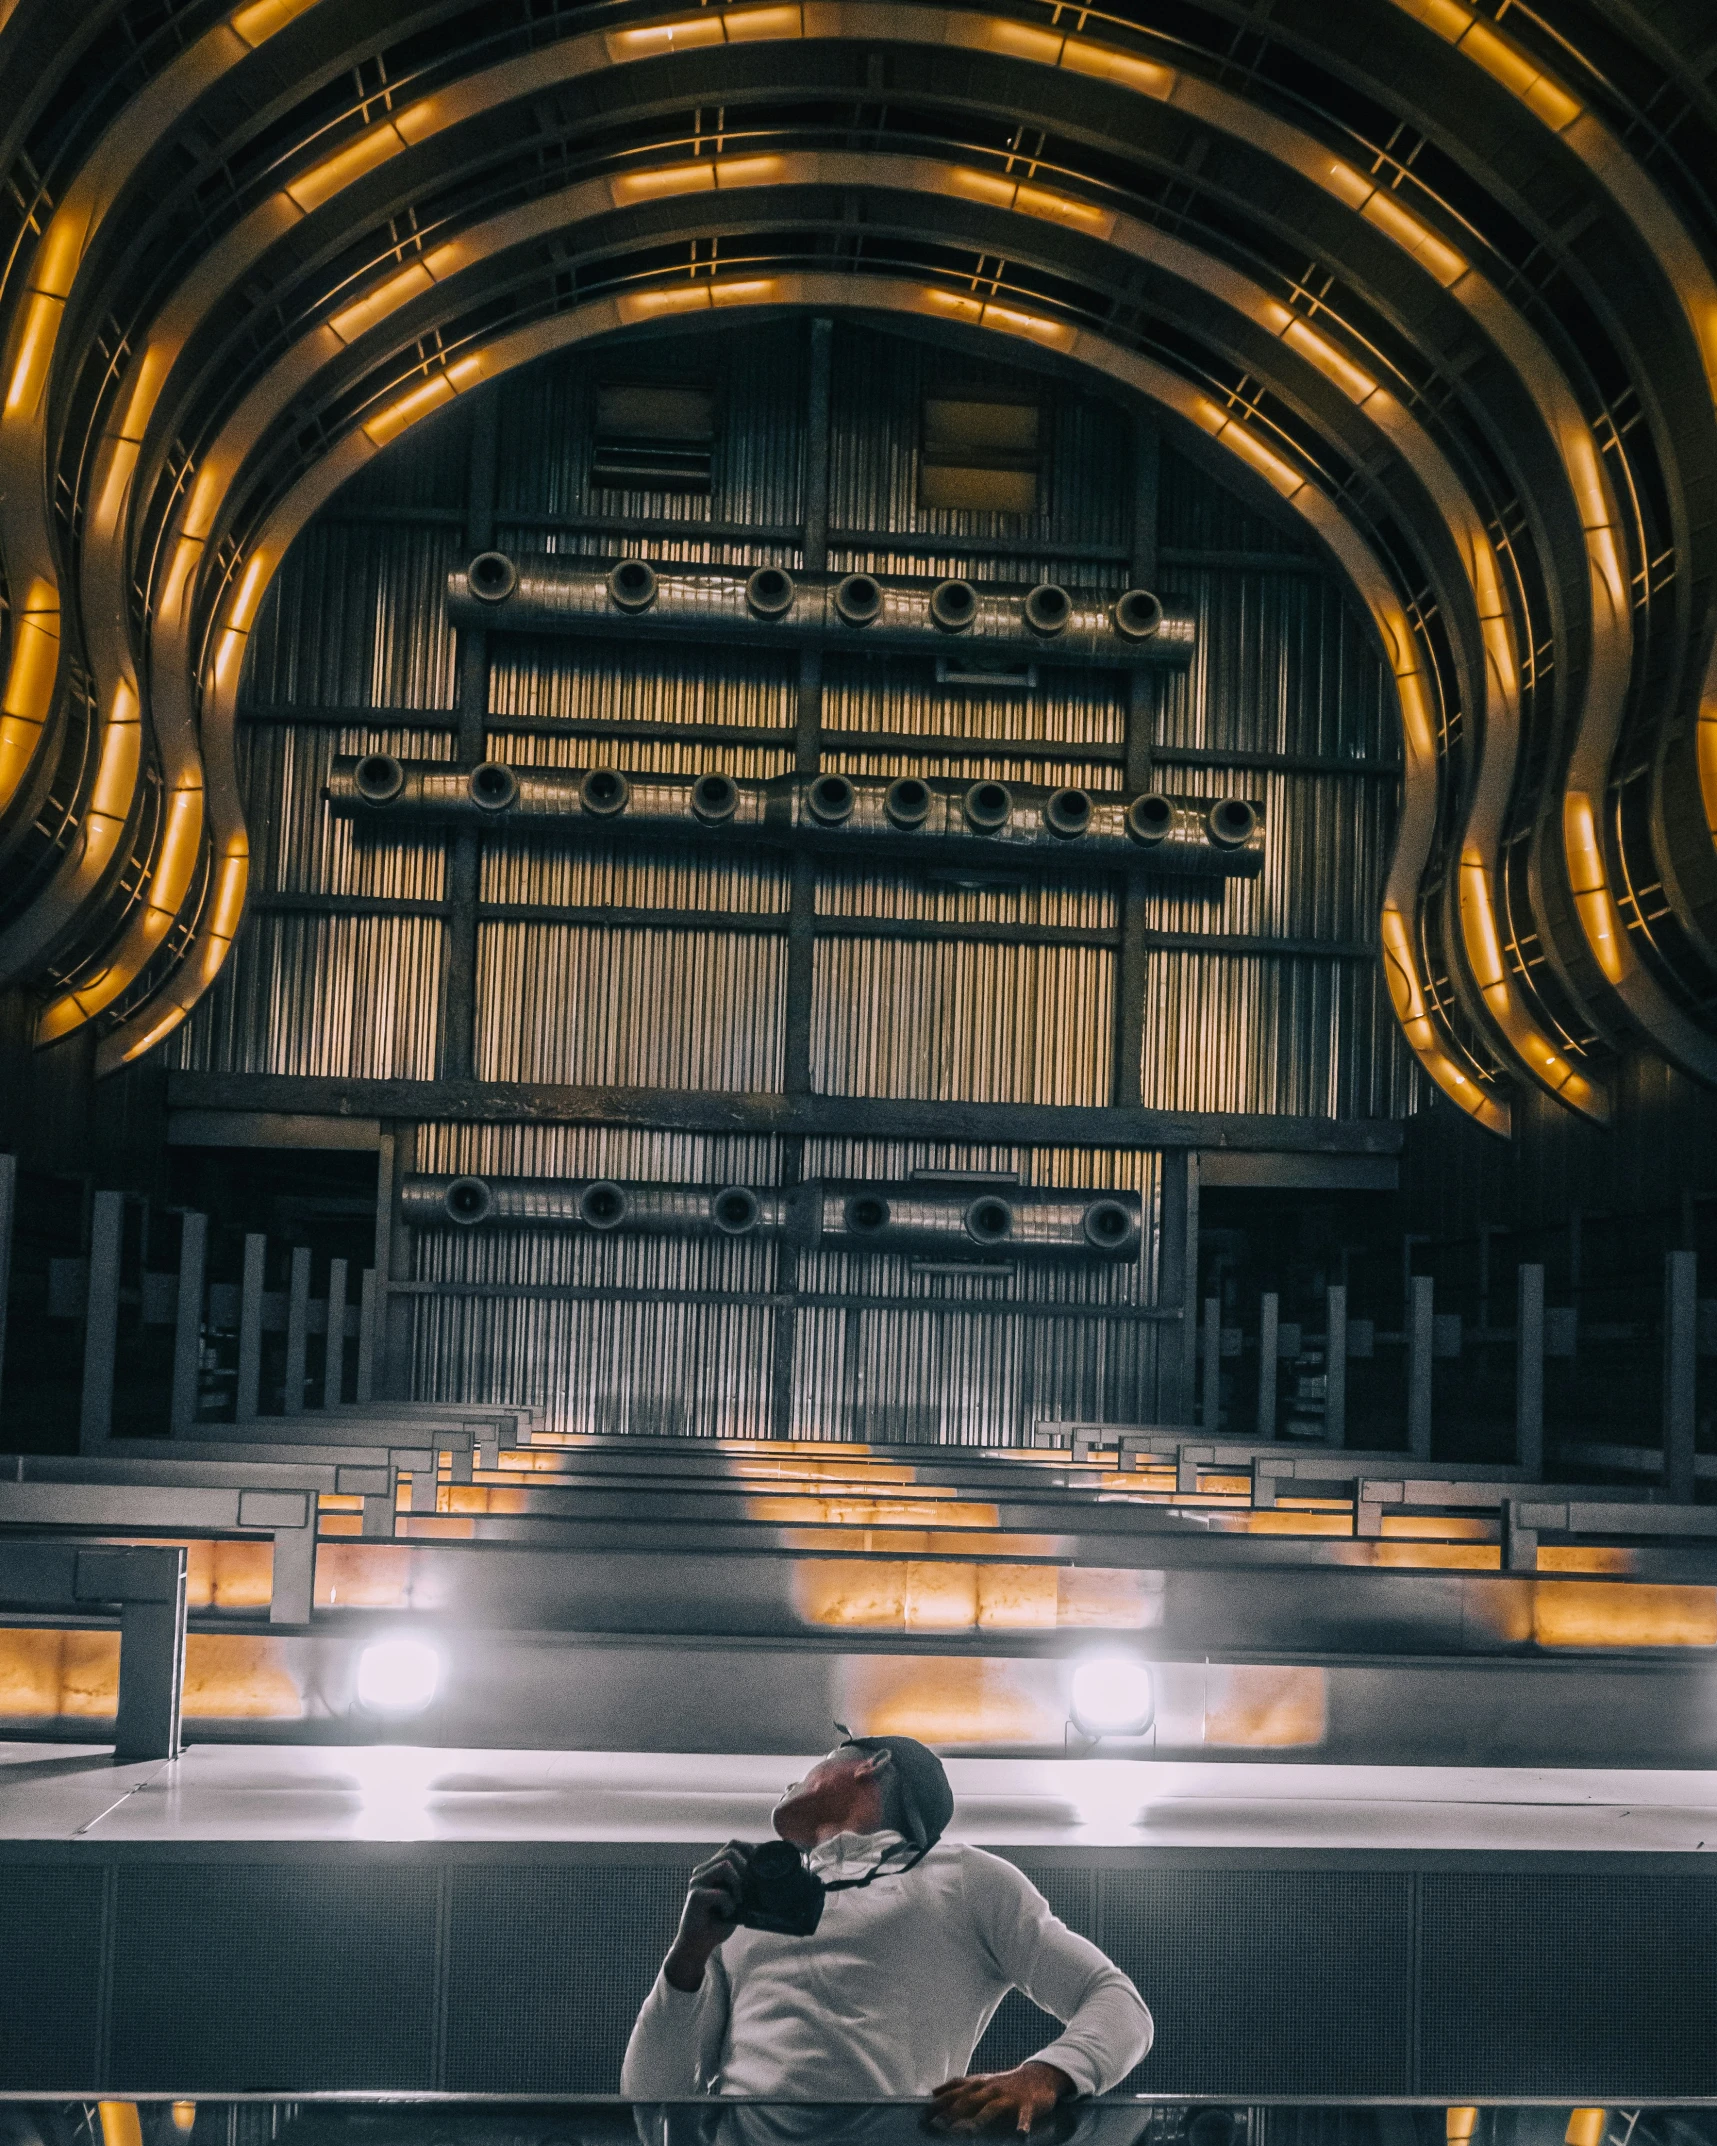 a man sits alone in front of an illuminated auditorium